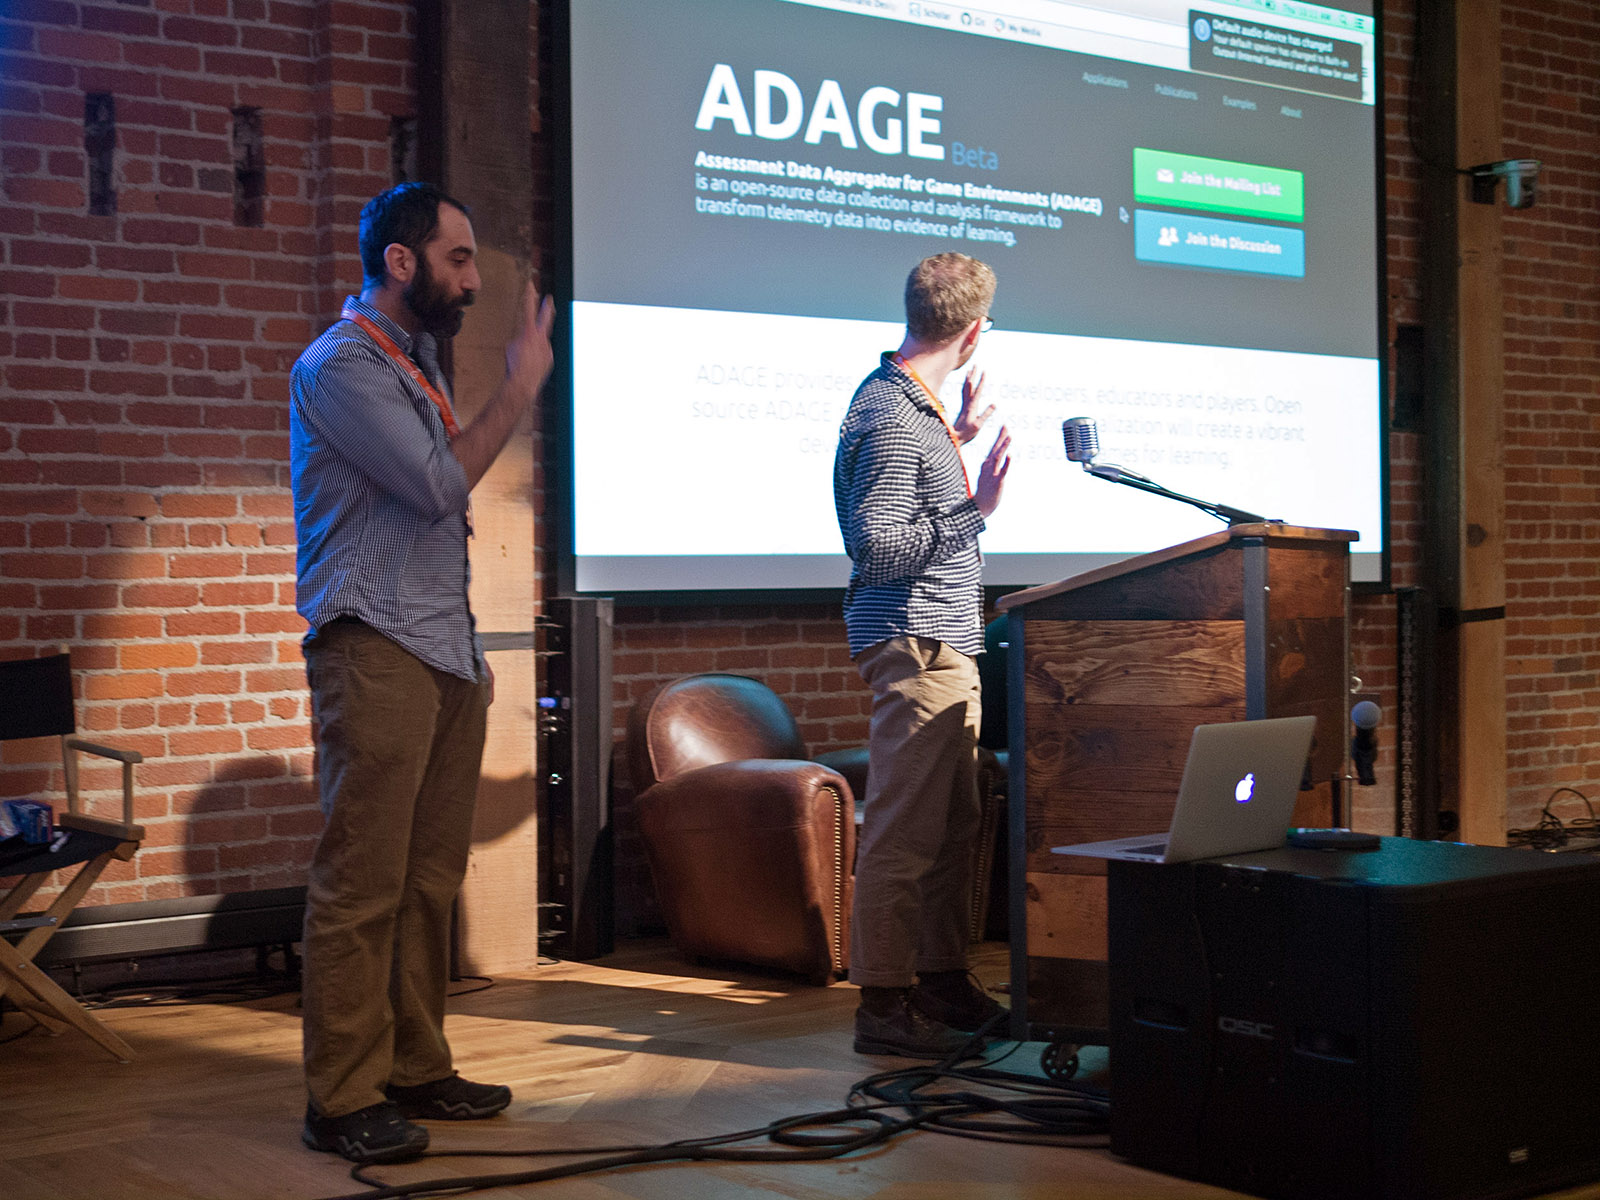 Hack Day Presentations: Assessment Data Aggregator for Gaming Environments